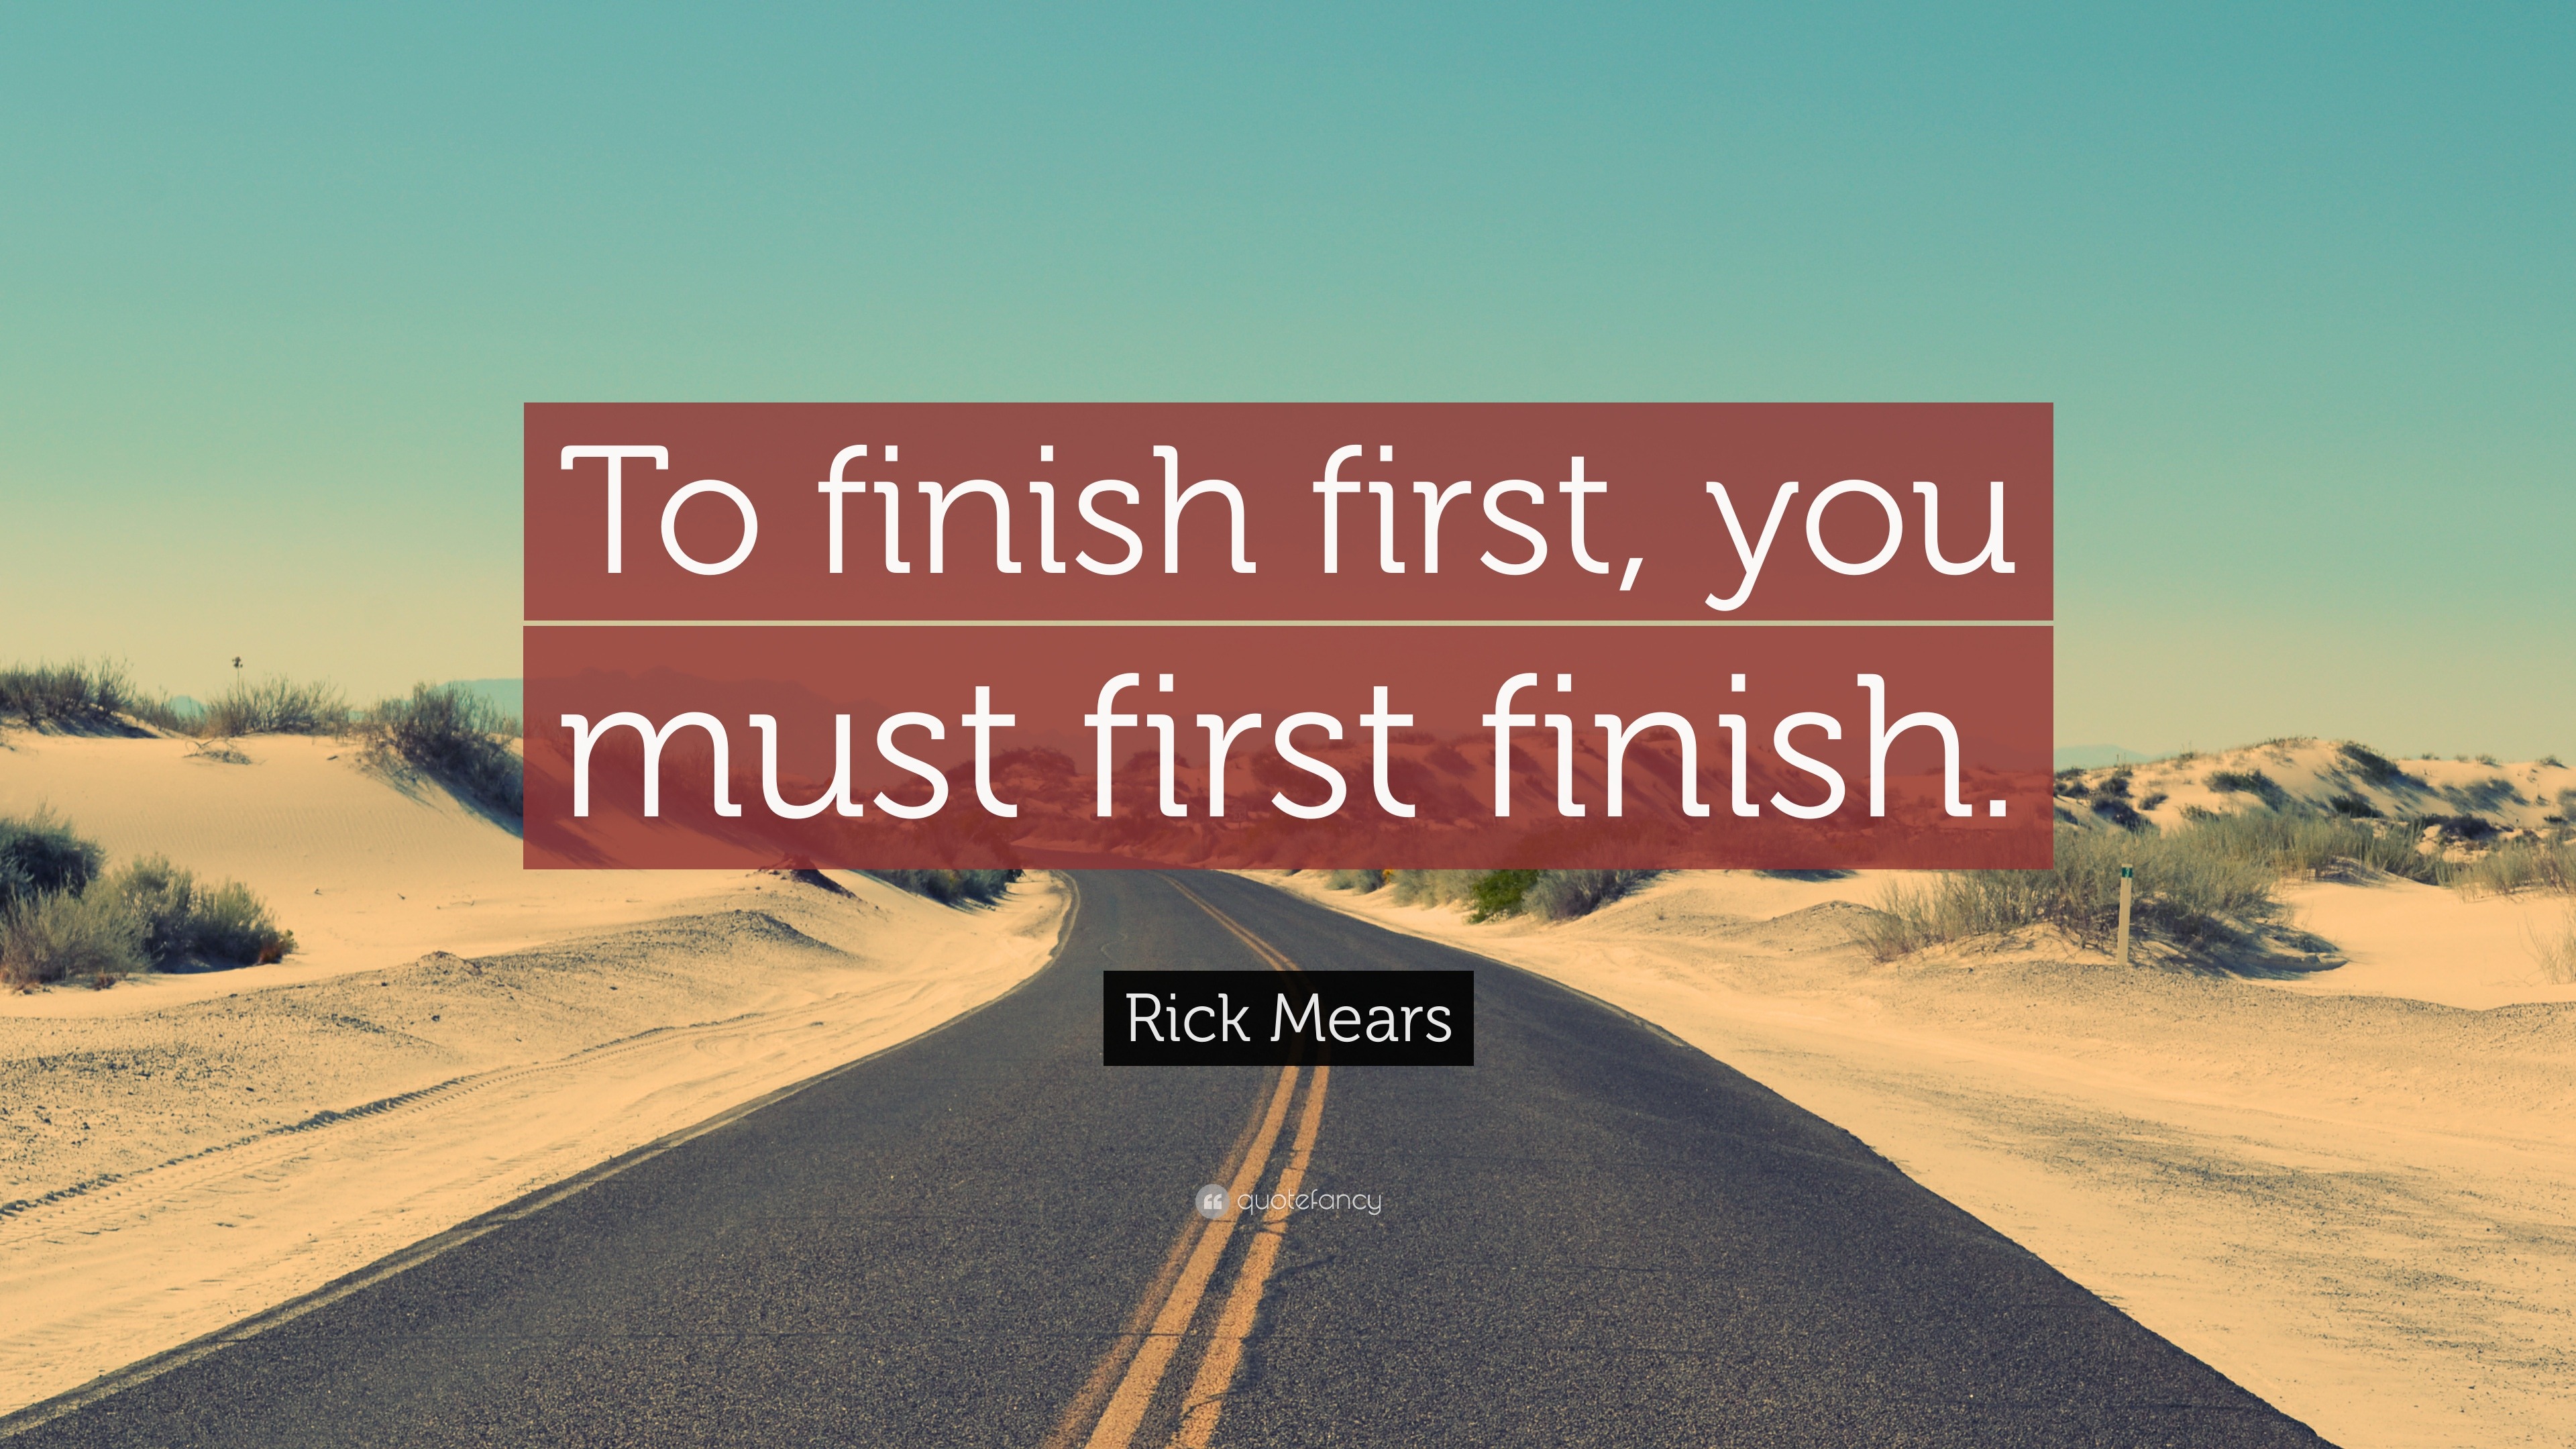 Rick Mears Quote “To finish first, you must first finish.”